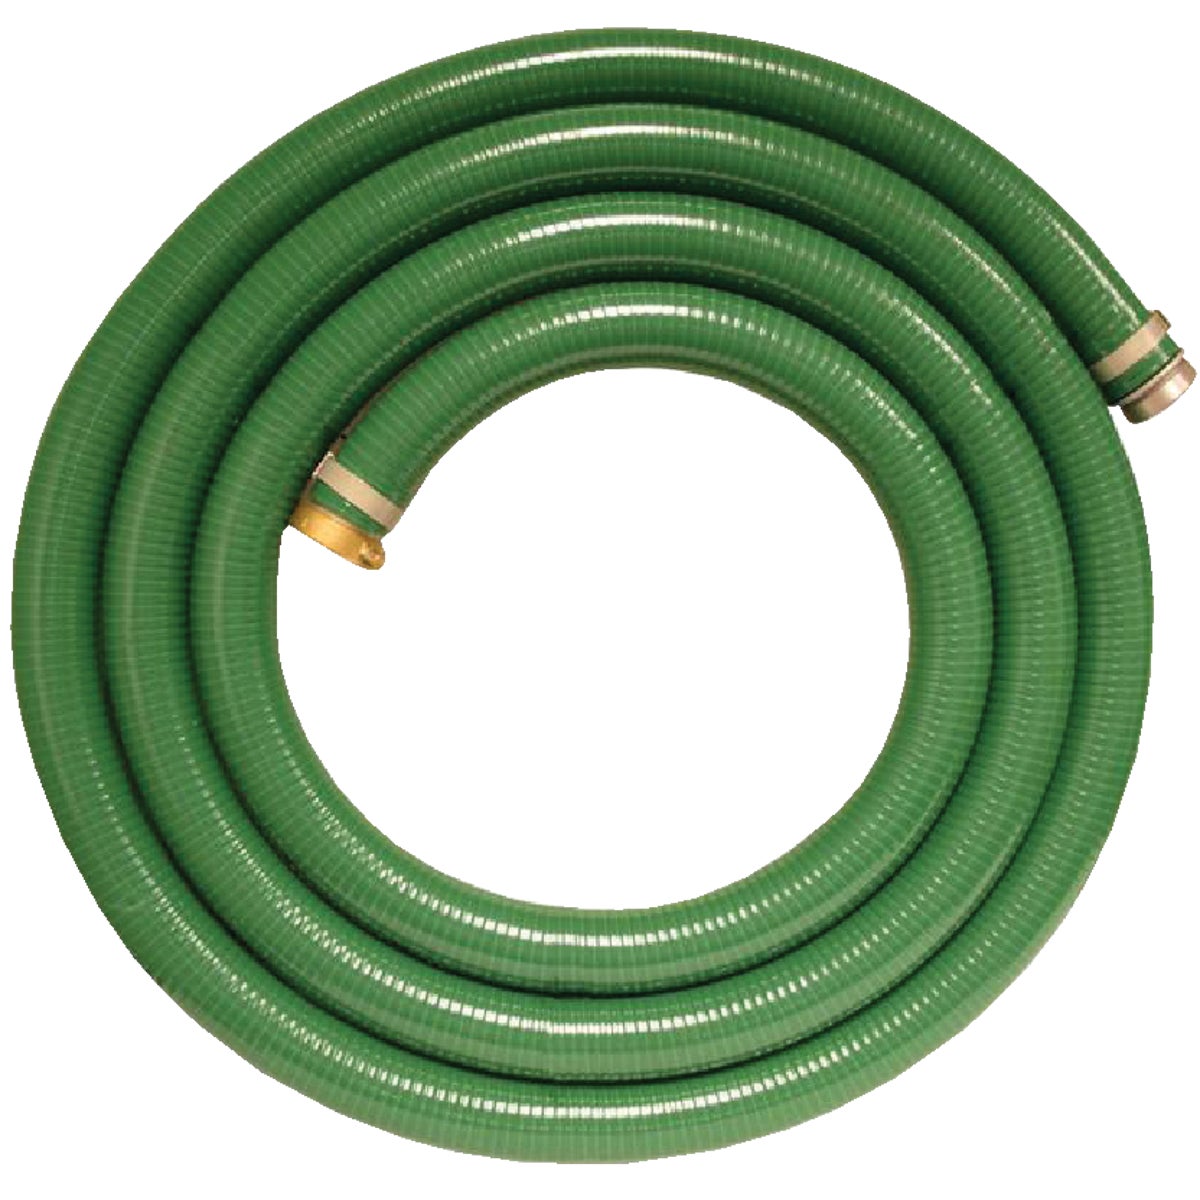 Item 701946, A PVC suction and discharge hose for water, light chemicals, and pumping 